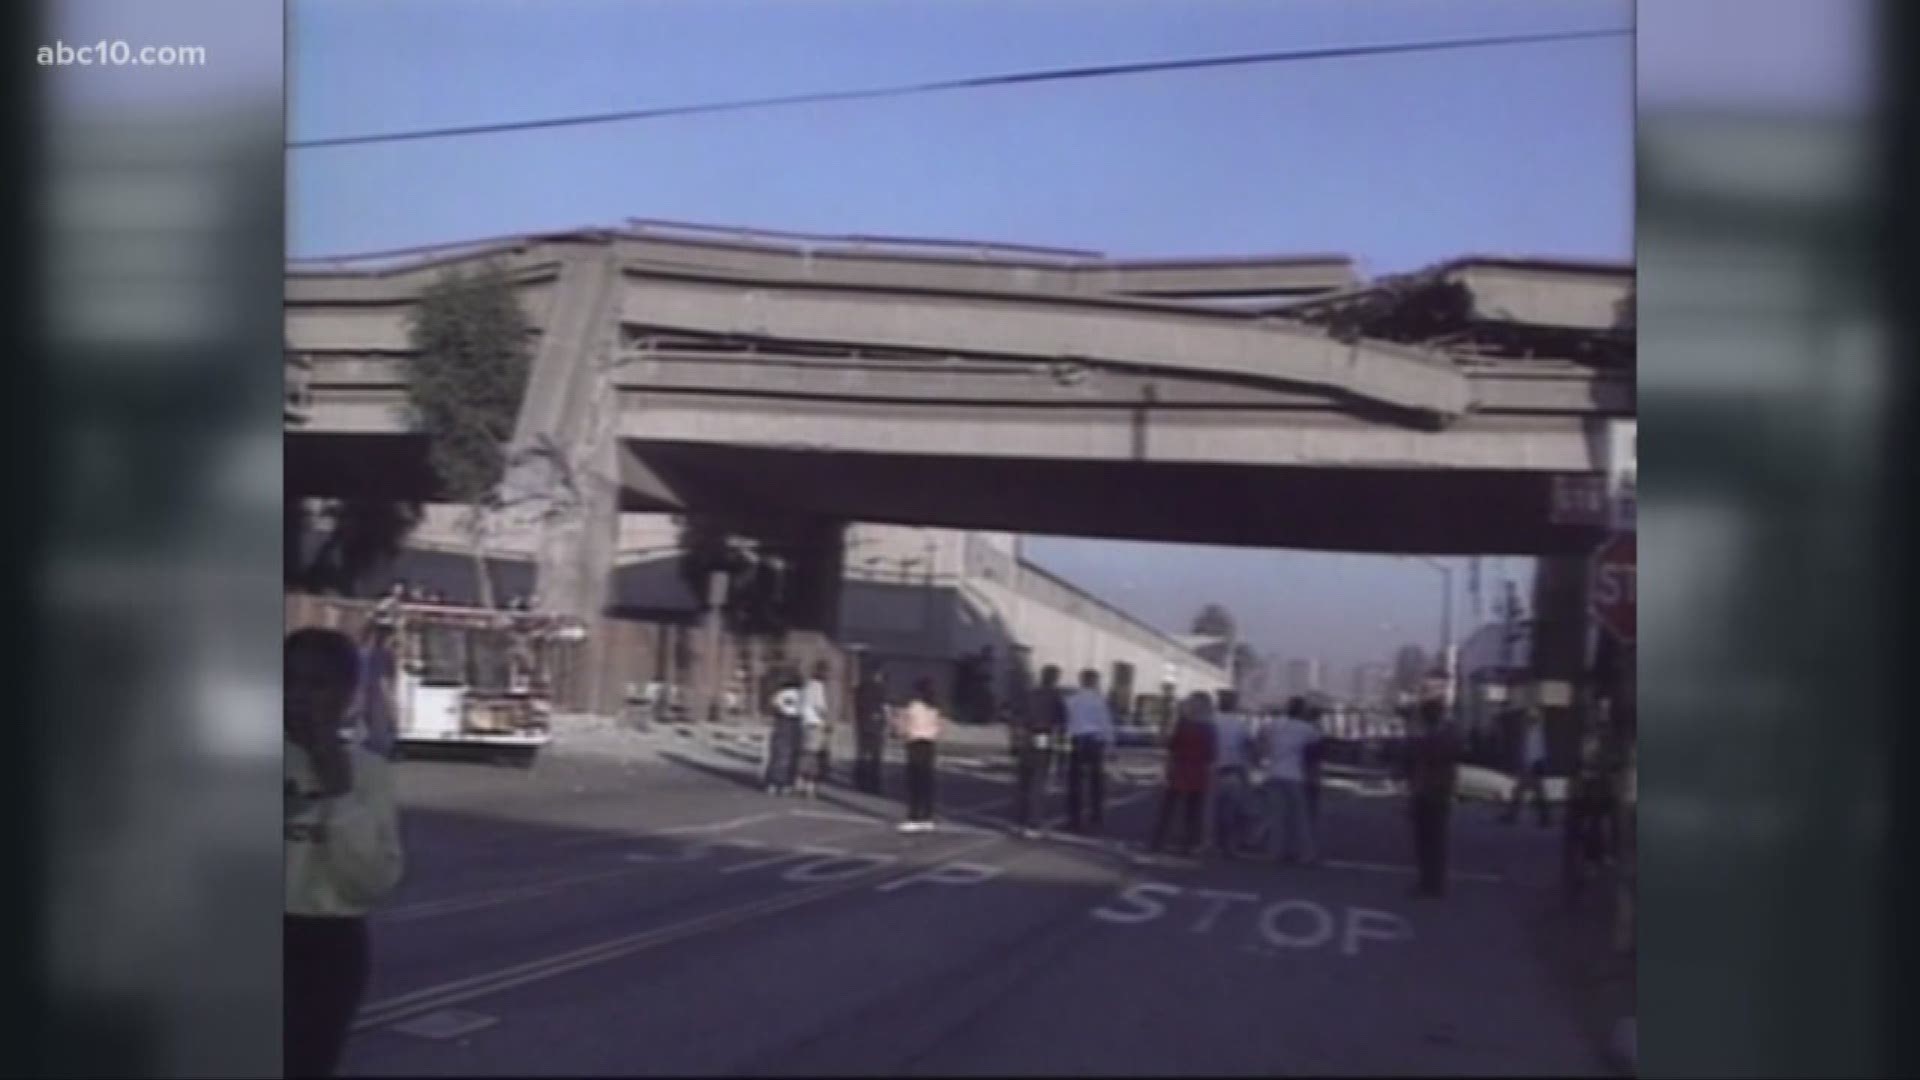 People are remembering where they were when the Loma Prieta Earthquake hit the San Francisco area 30 years ago.